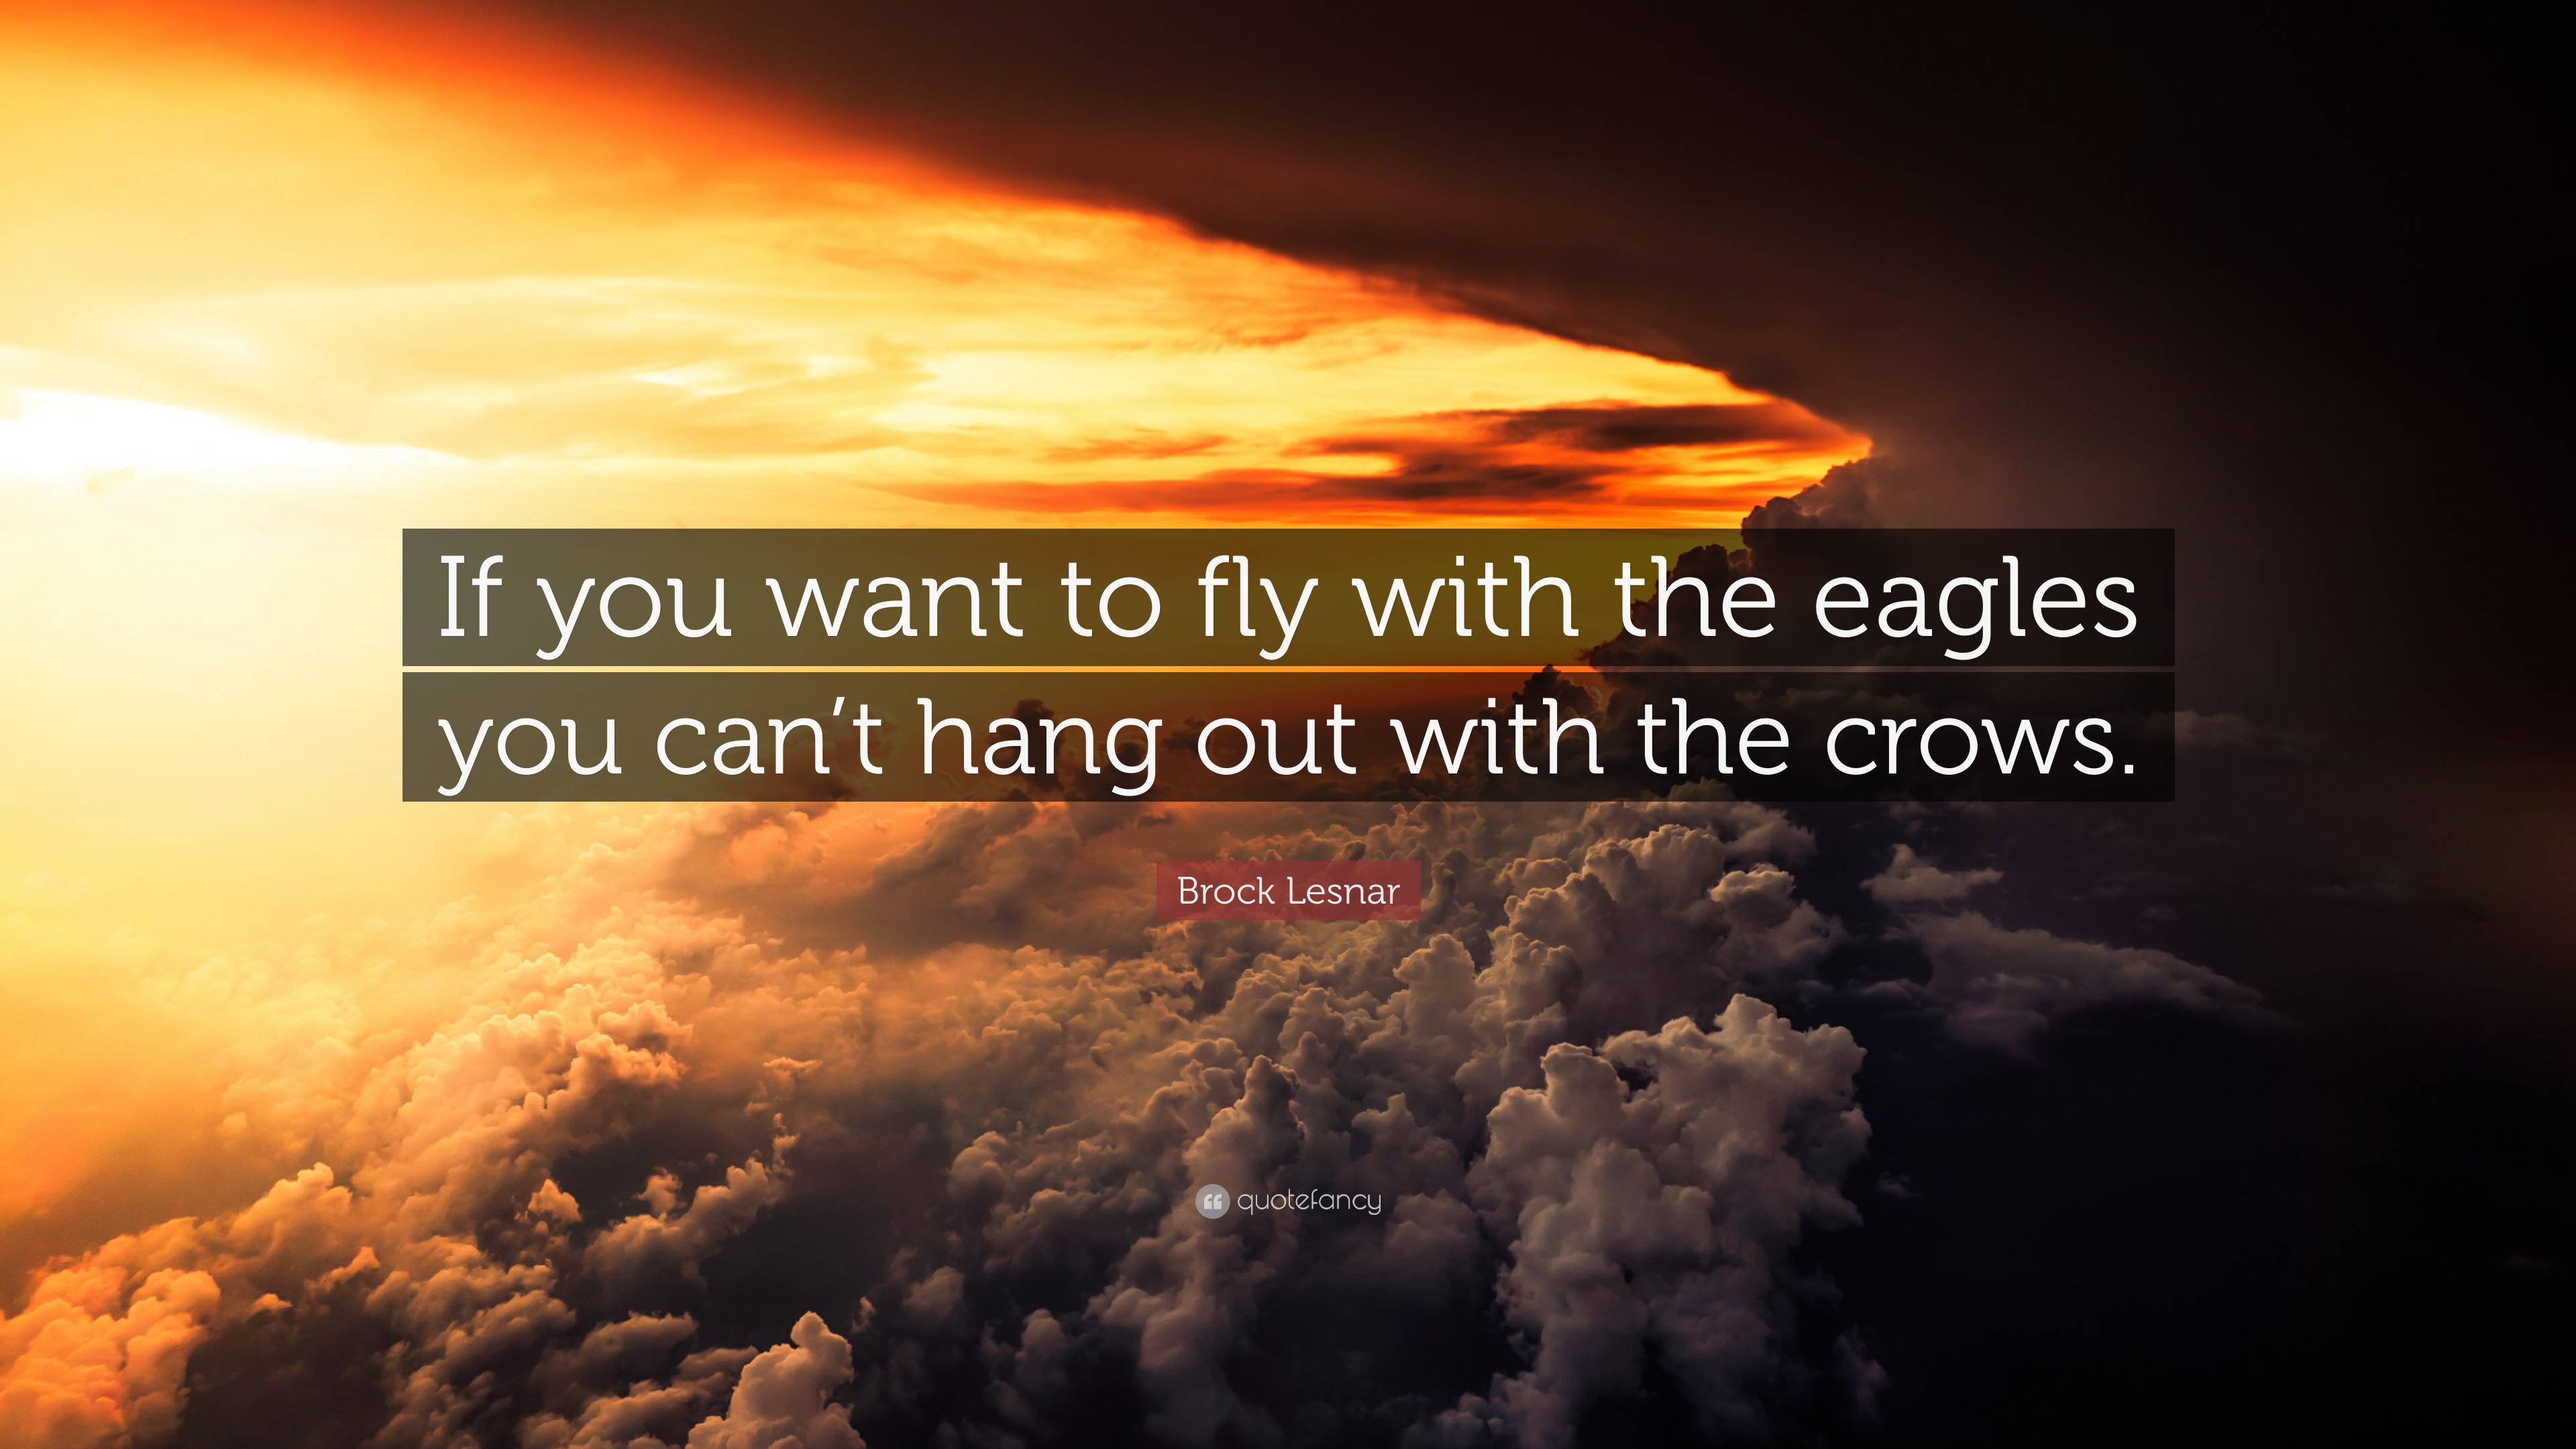 Brock Lesnar Quote If You Want To Fly With The Eagles You Can T Hang Out